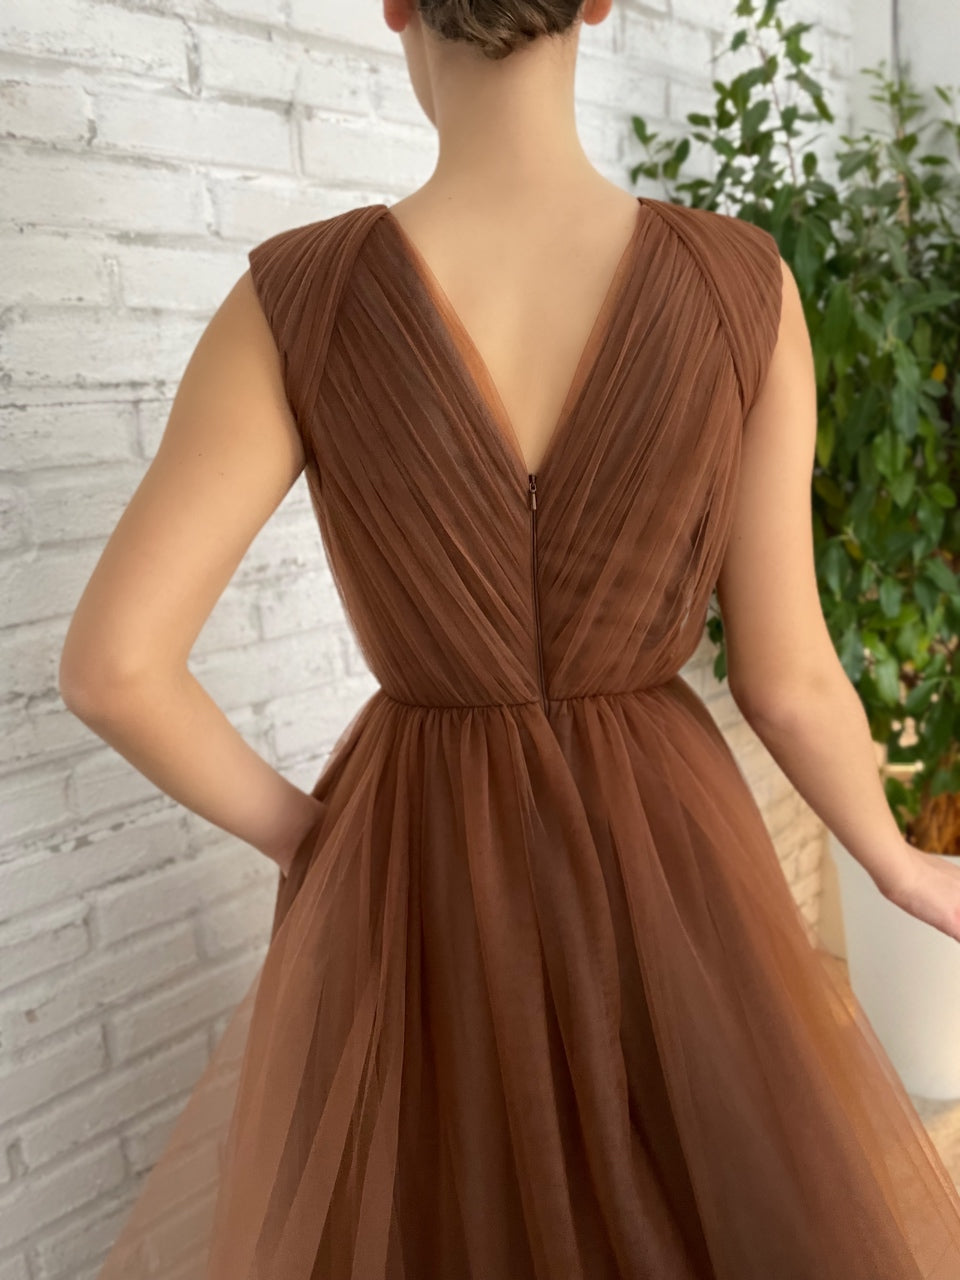 Brown A-Line dress with belt, no sleeves and v-neck